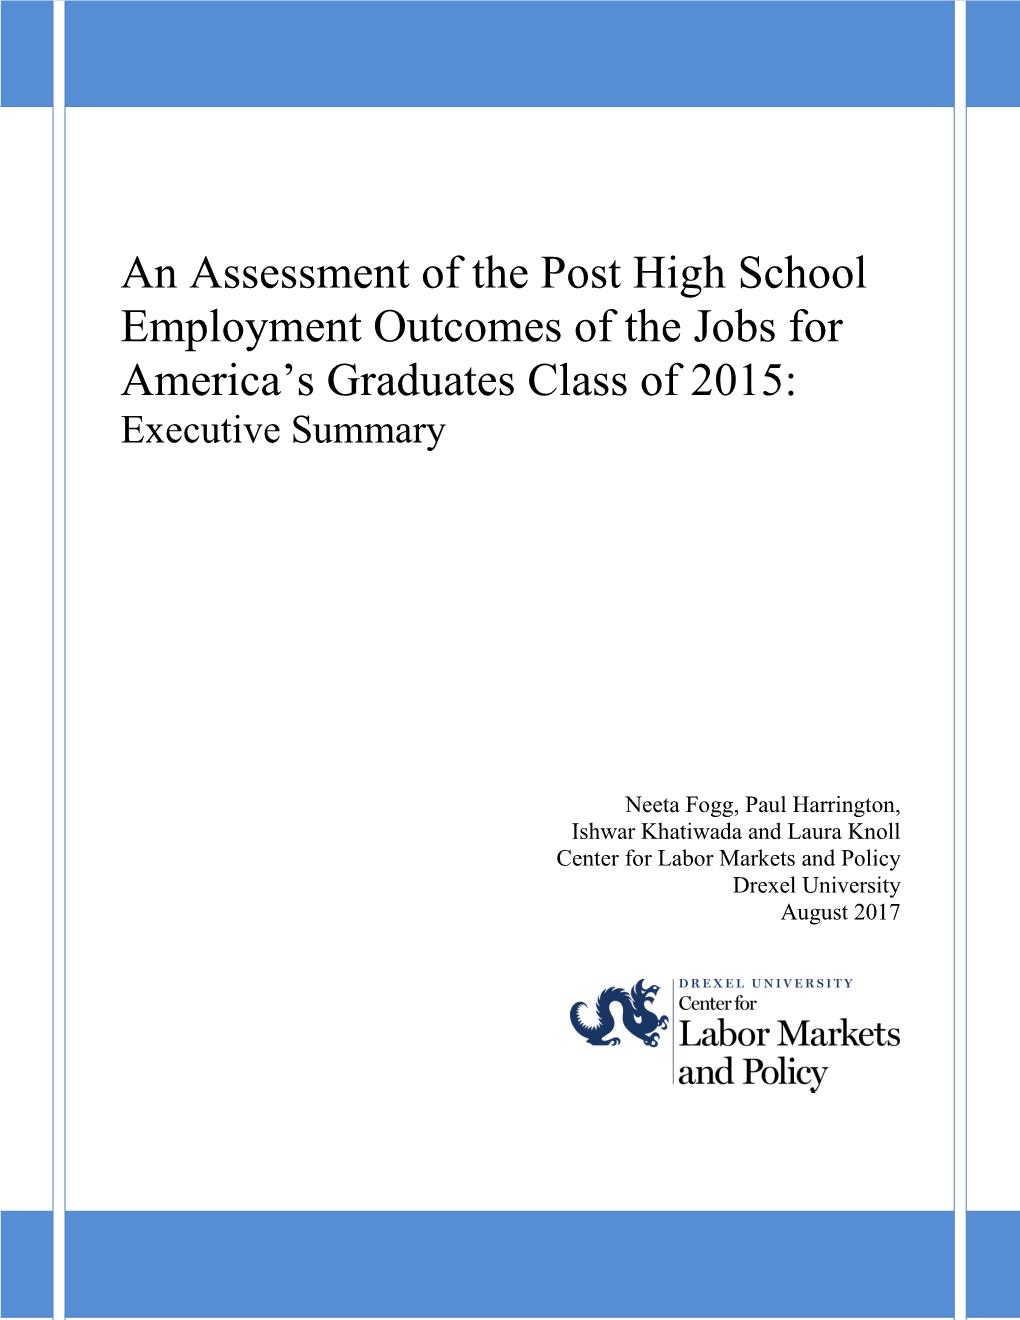 An Assessment of the Post High School Employment Outcomes of the Jobs for America’S Graduates Class of 2015: Executive Summary